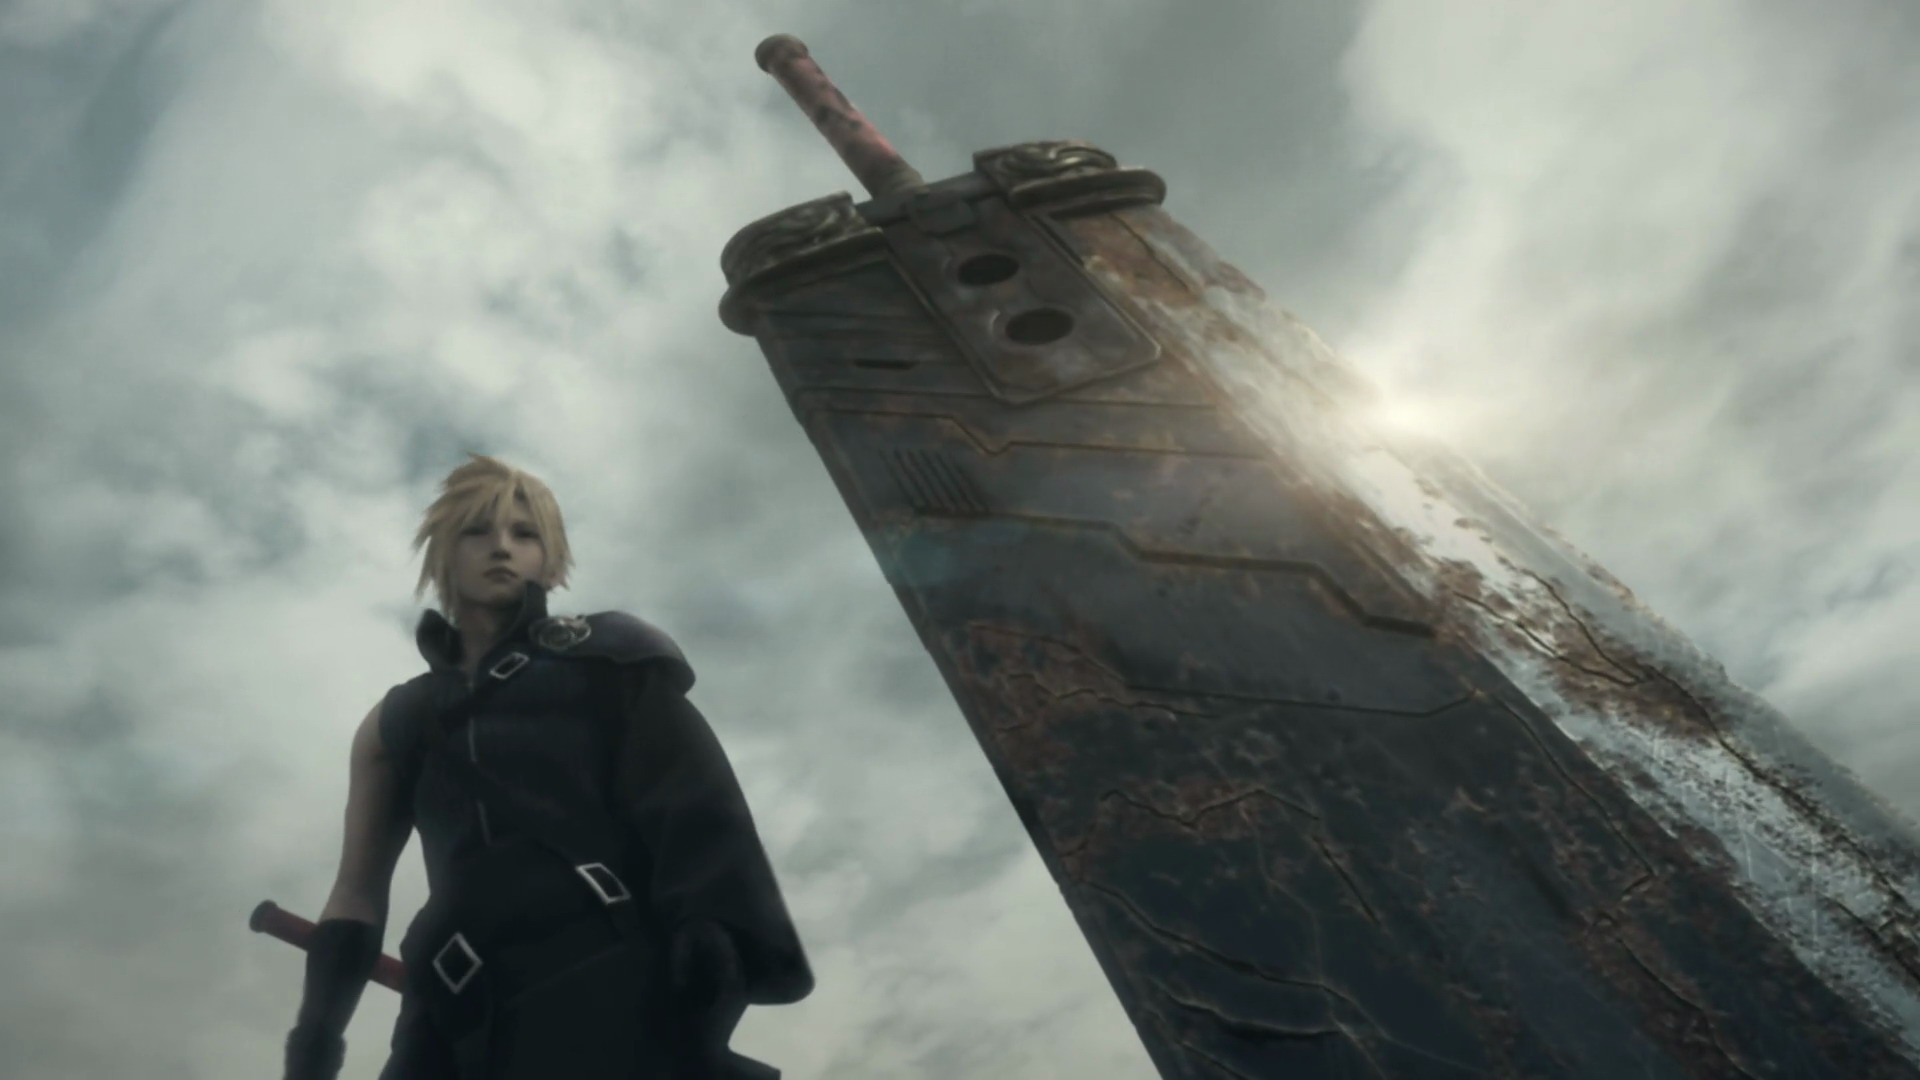 Amazing Final Fantasy Vii Advent Children Pictures & Backgrounds